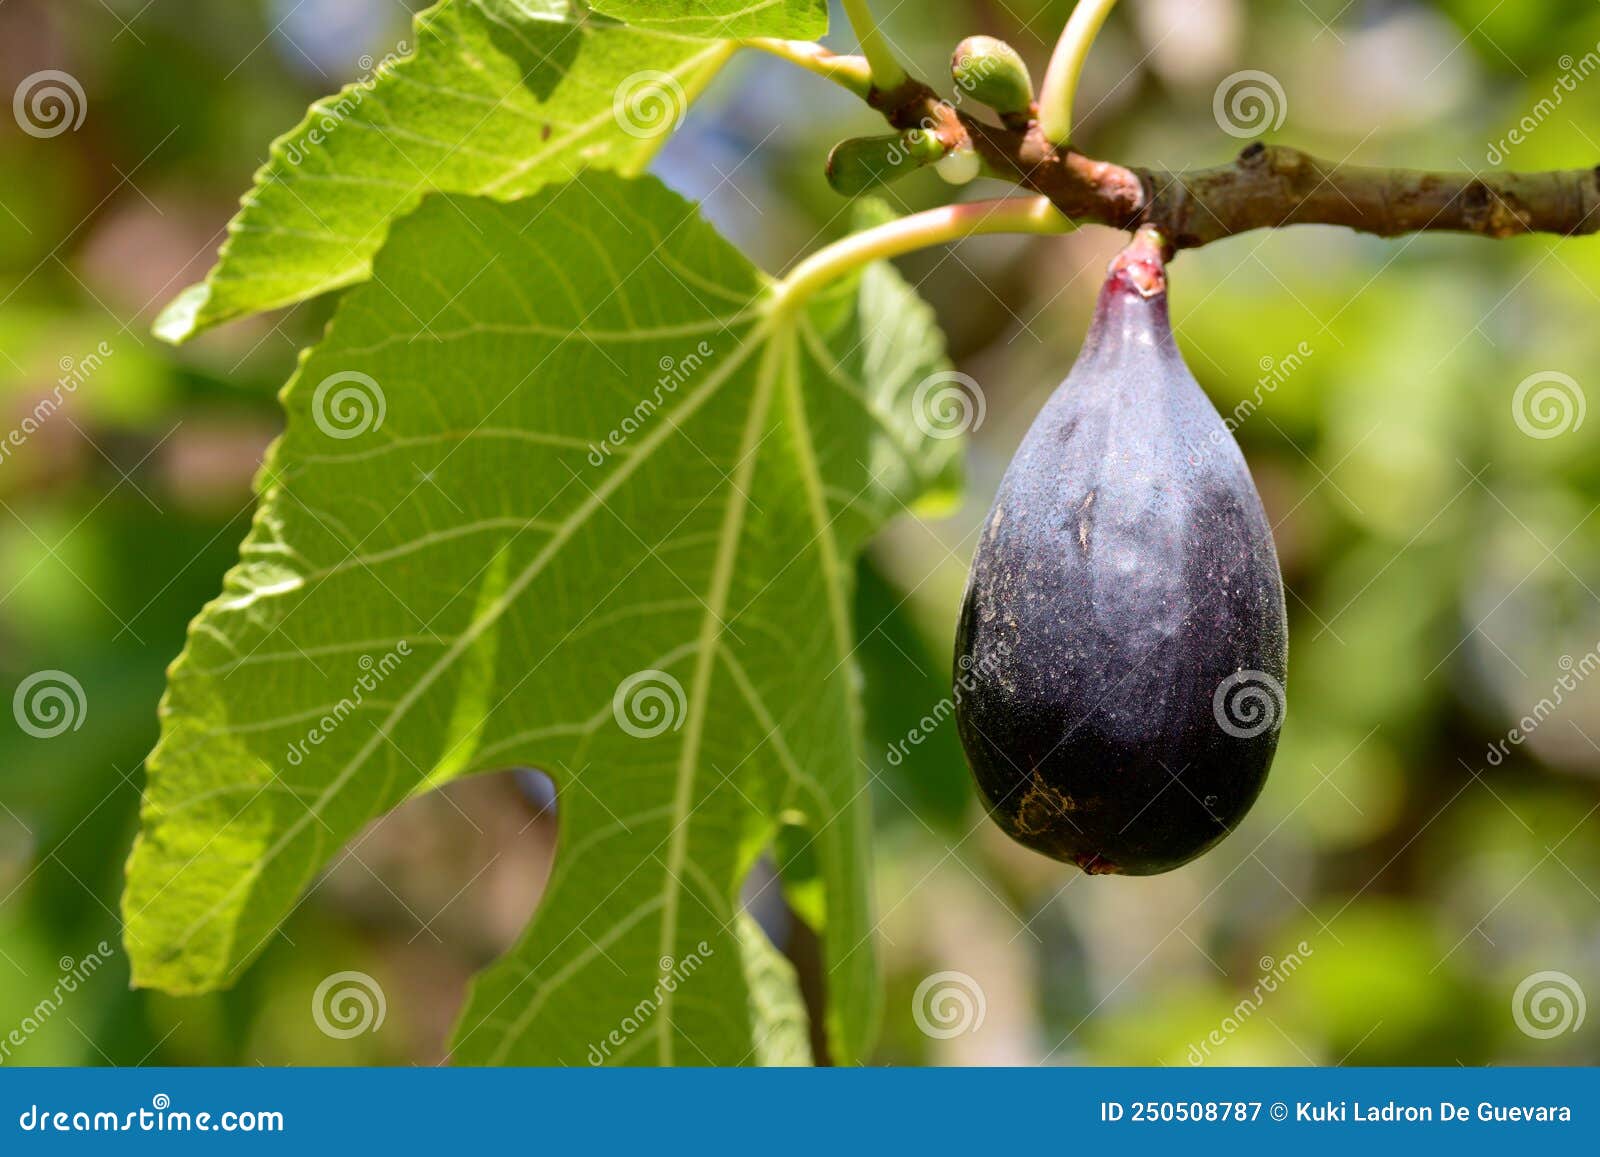 fruits of the fig tree, ficus carica